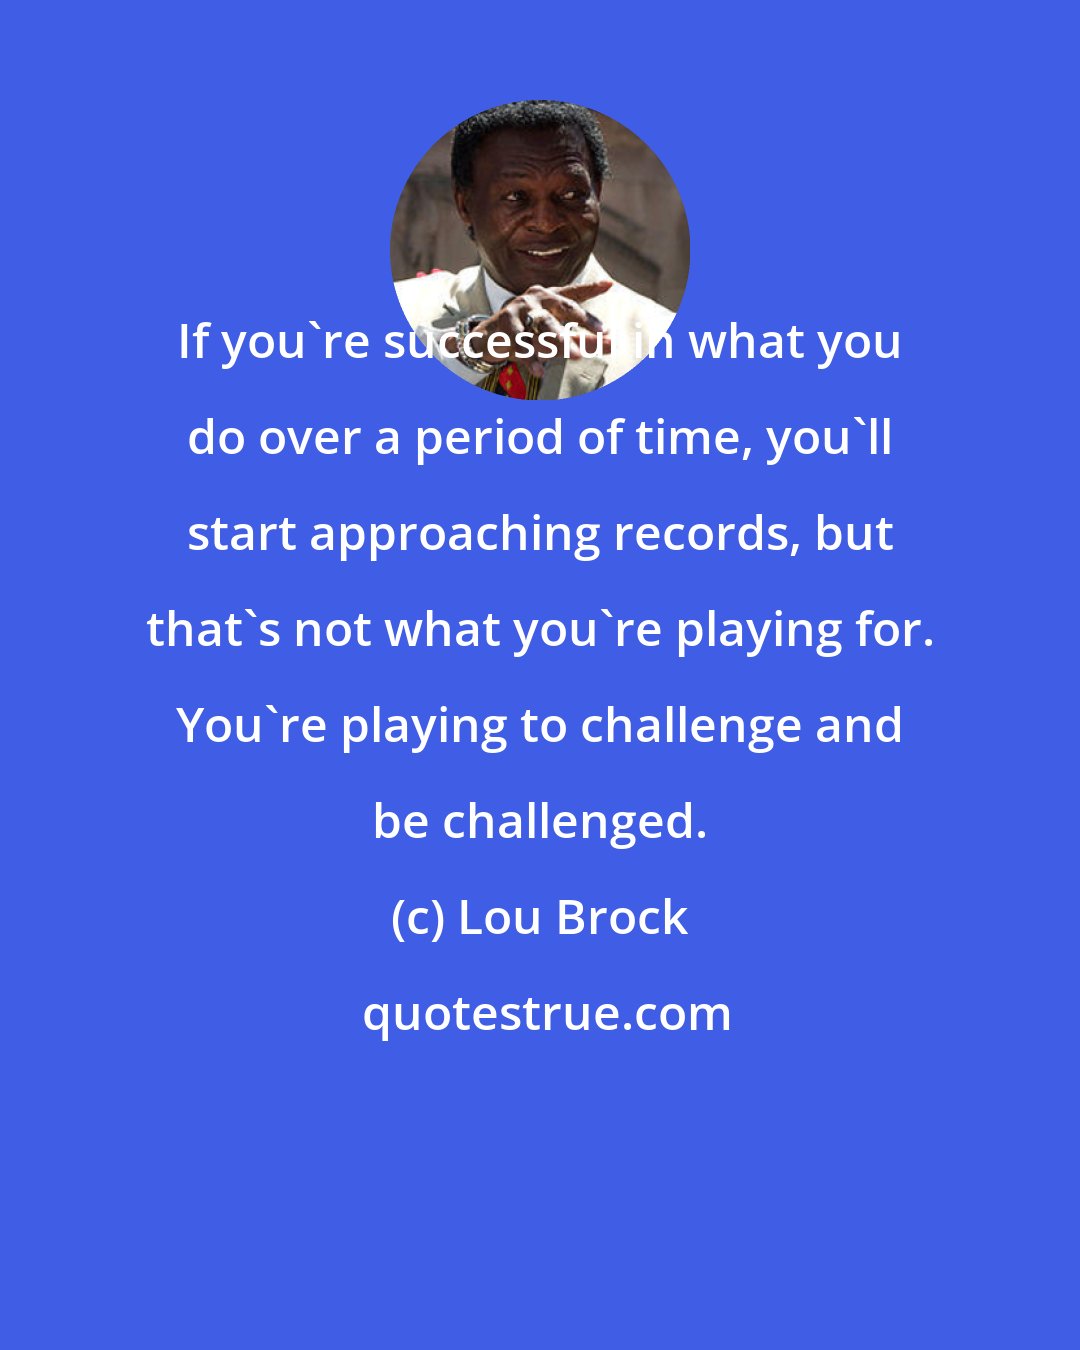 Lou Brock: If you're successful in what you do over a period of time, you'll start approaching records, but that's not what you're playing for. You're playing to challenge and be challenged.